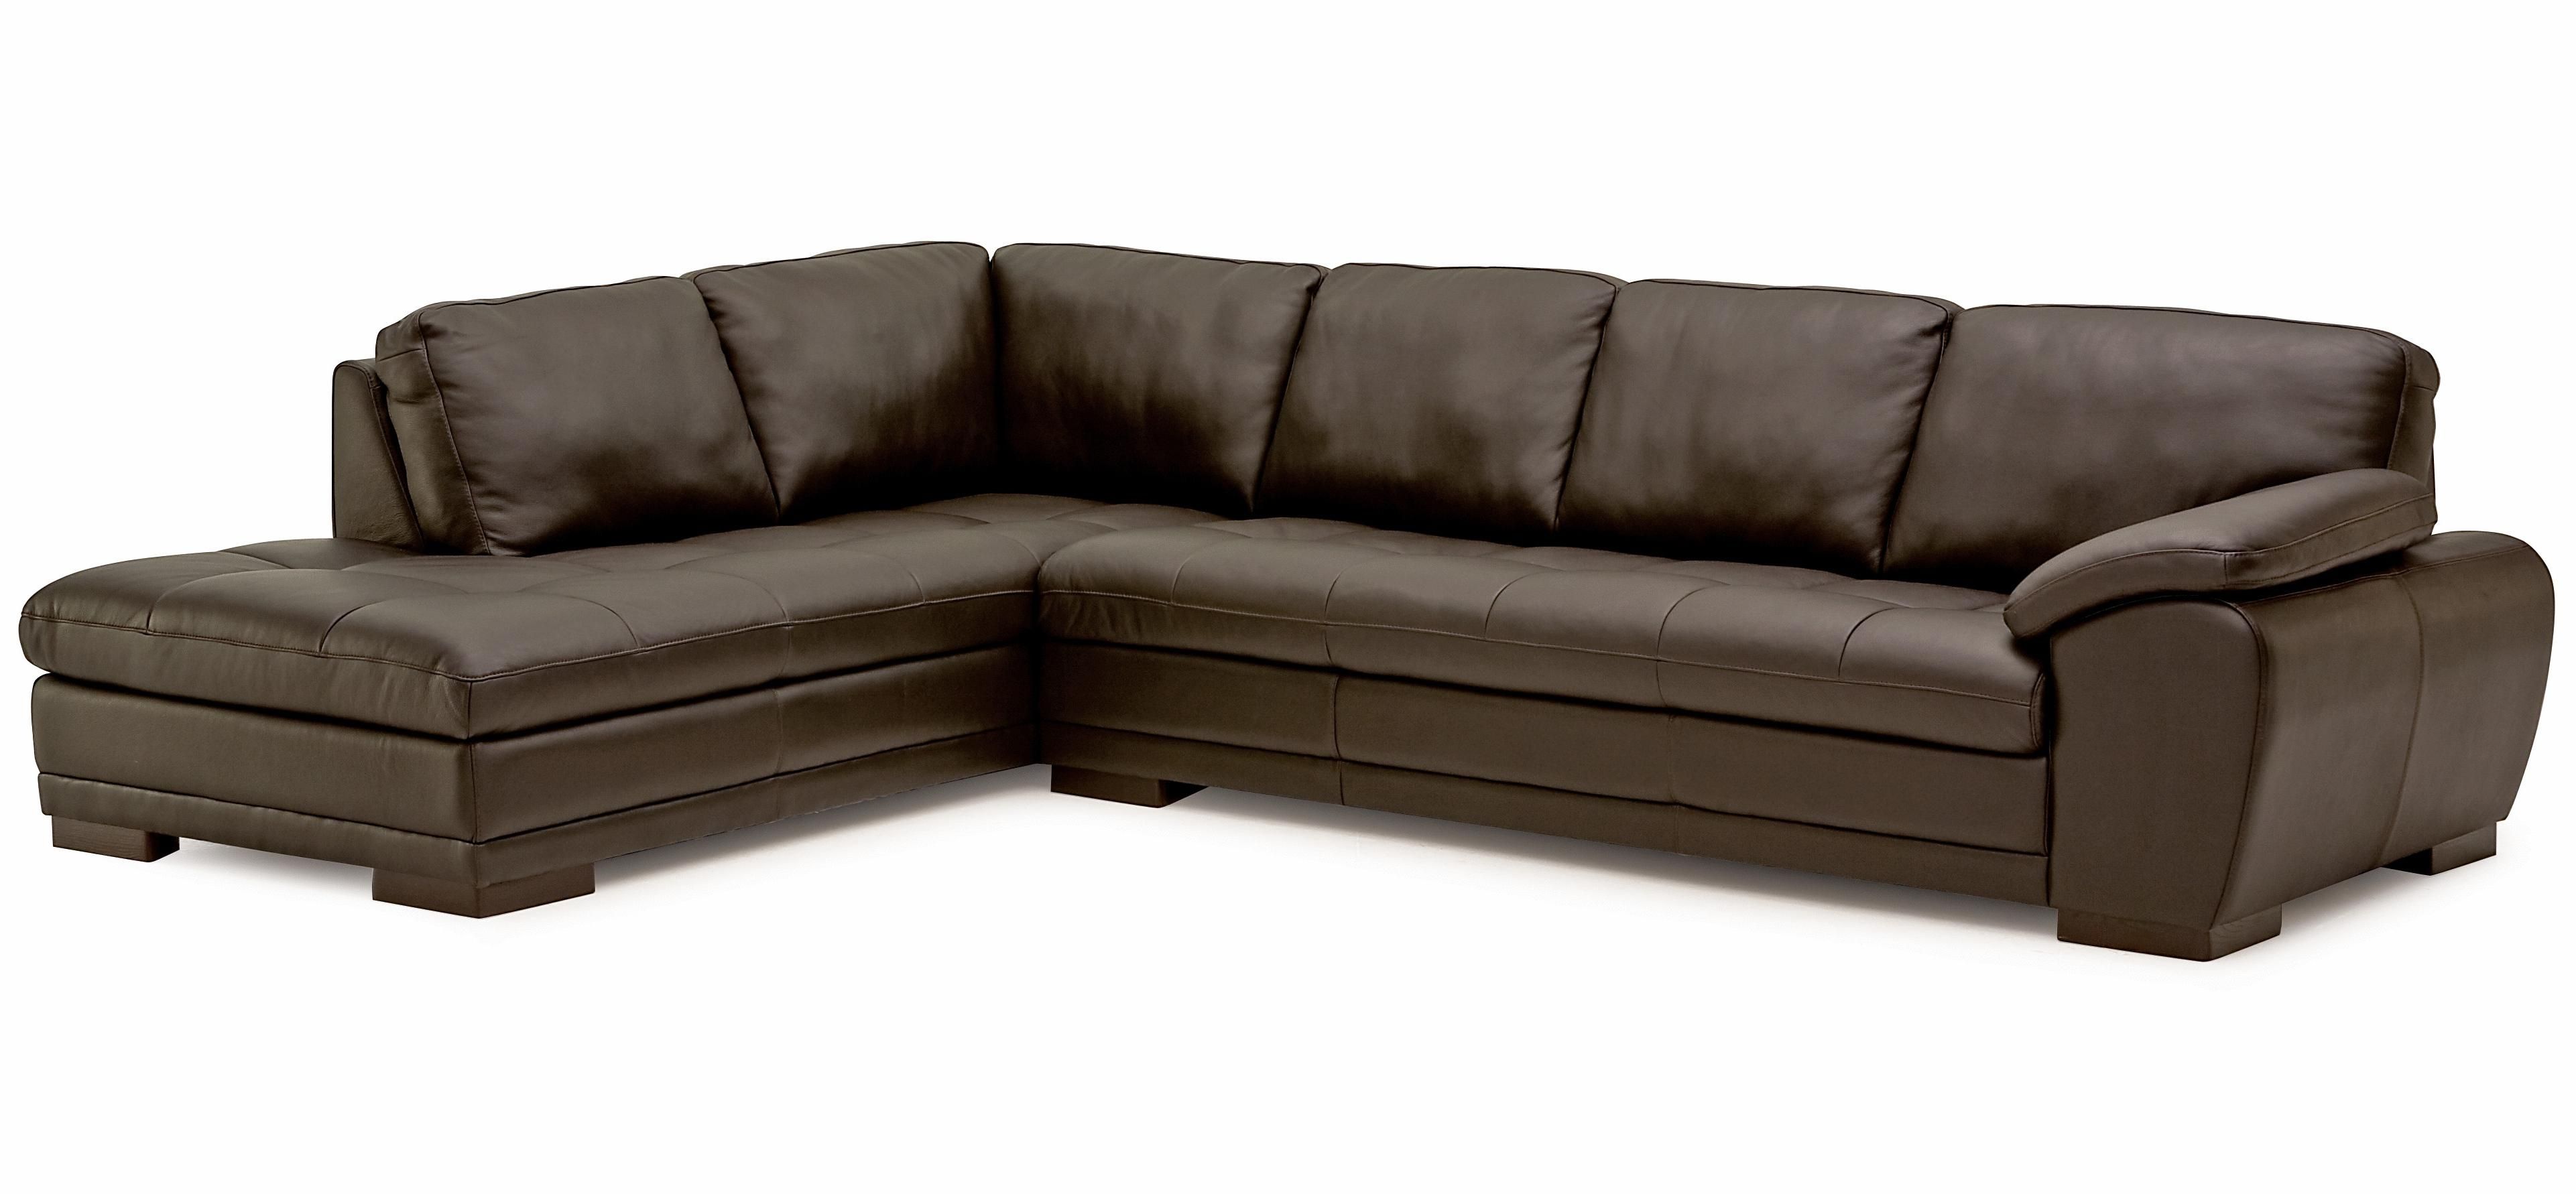 Palliser Miami Contemporary 2 Piece Sectional Sofa With Left Facing Within Miami Sectional Sofas (View 4 of 10)